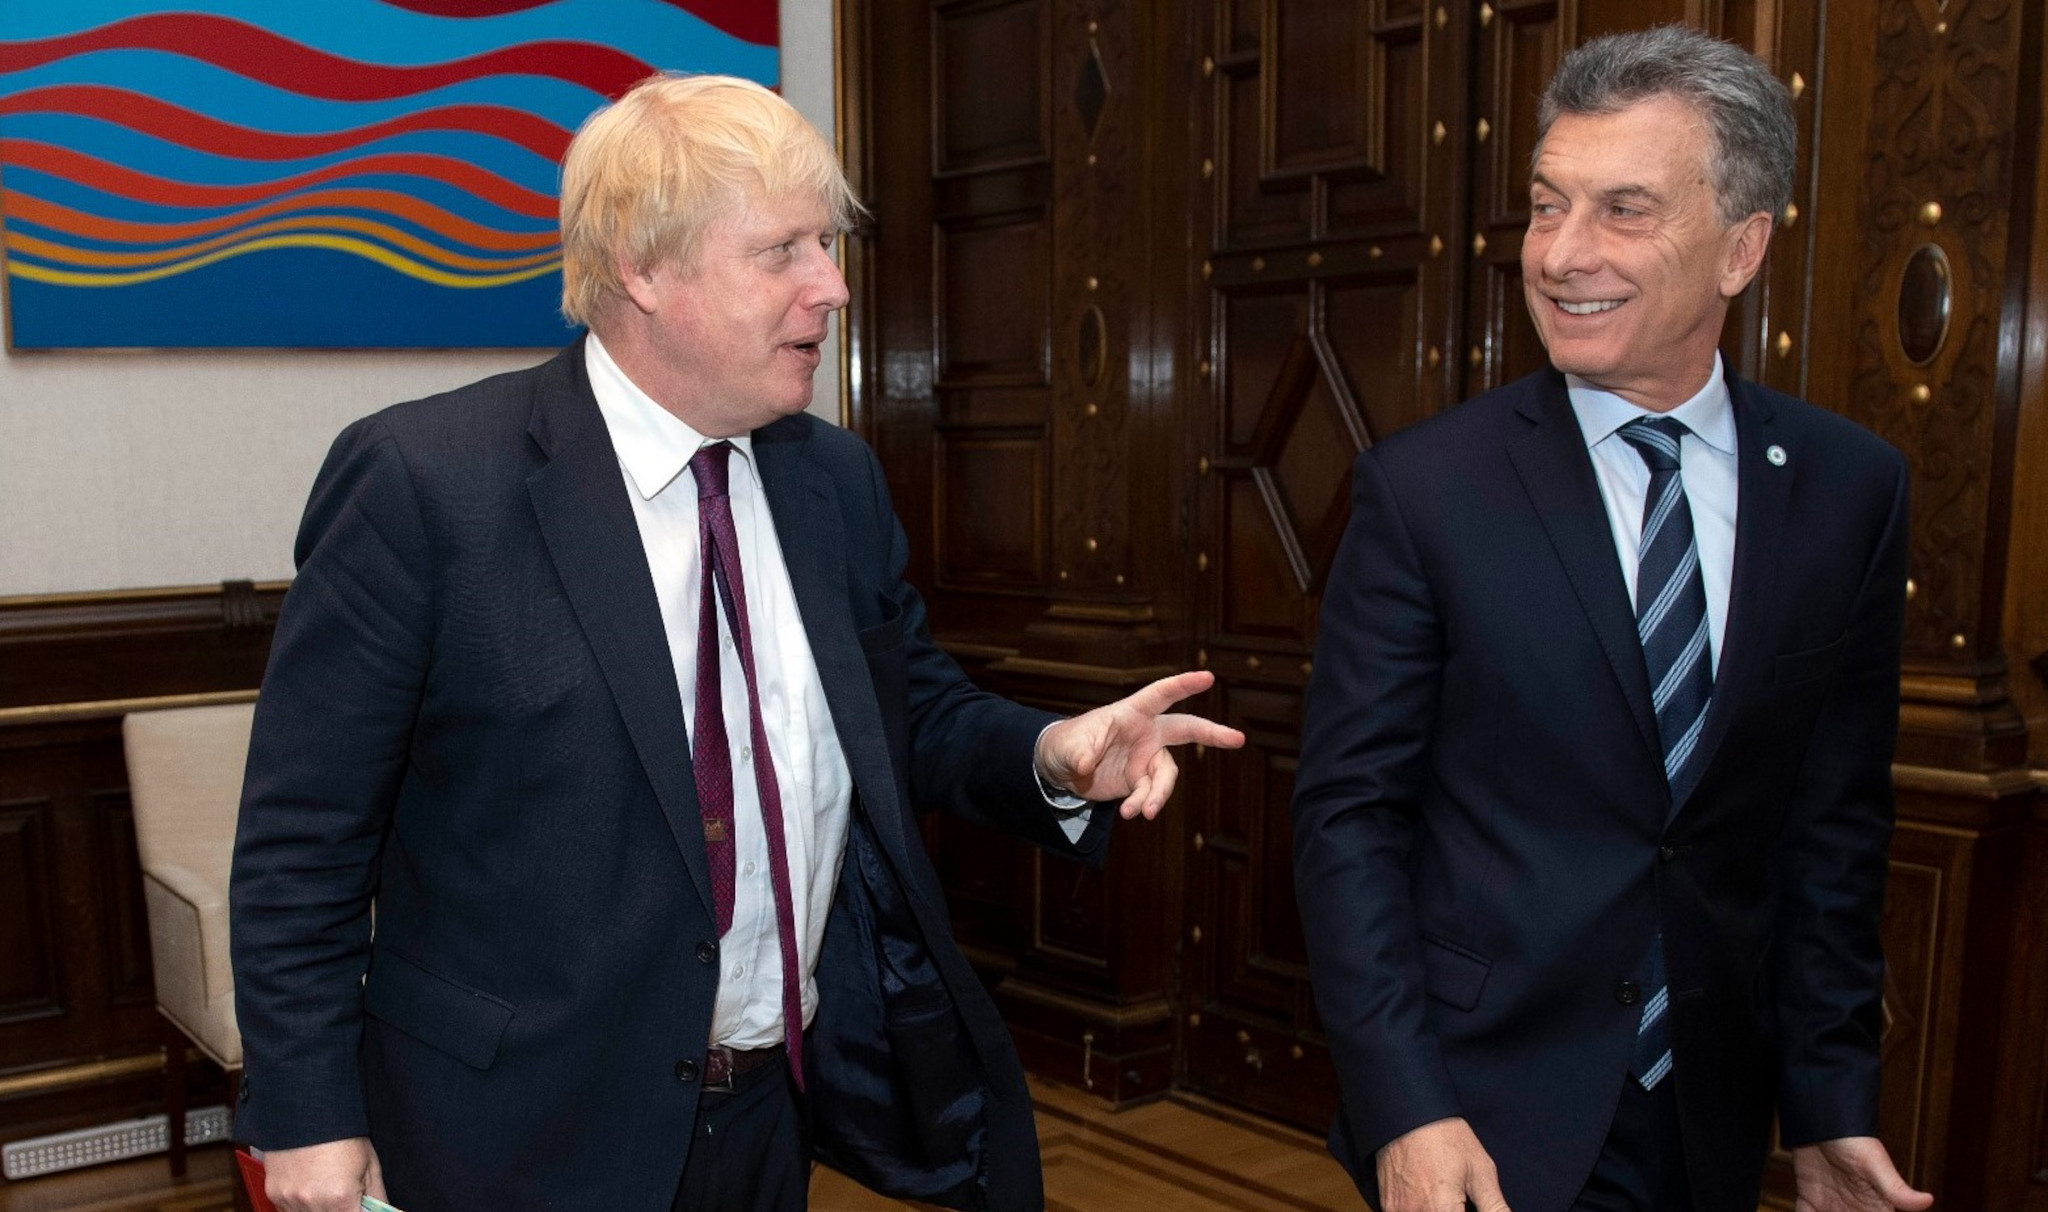 Foreign Secretary Boris Johnson meets with President Mauricio Macri in Buenos Aires, Argentina, 22 May 2018. (Photo: UK government)